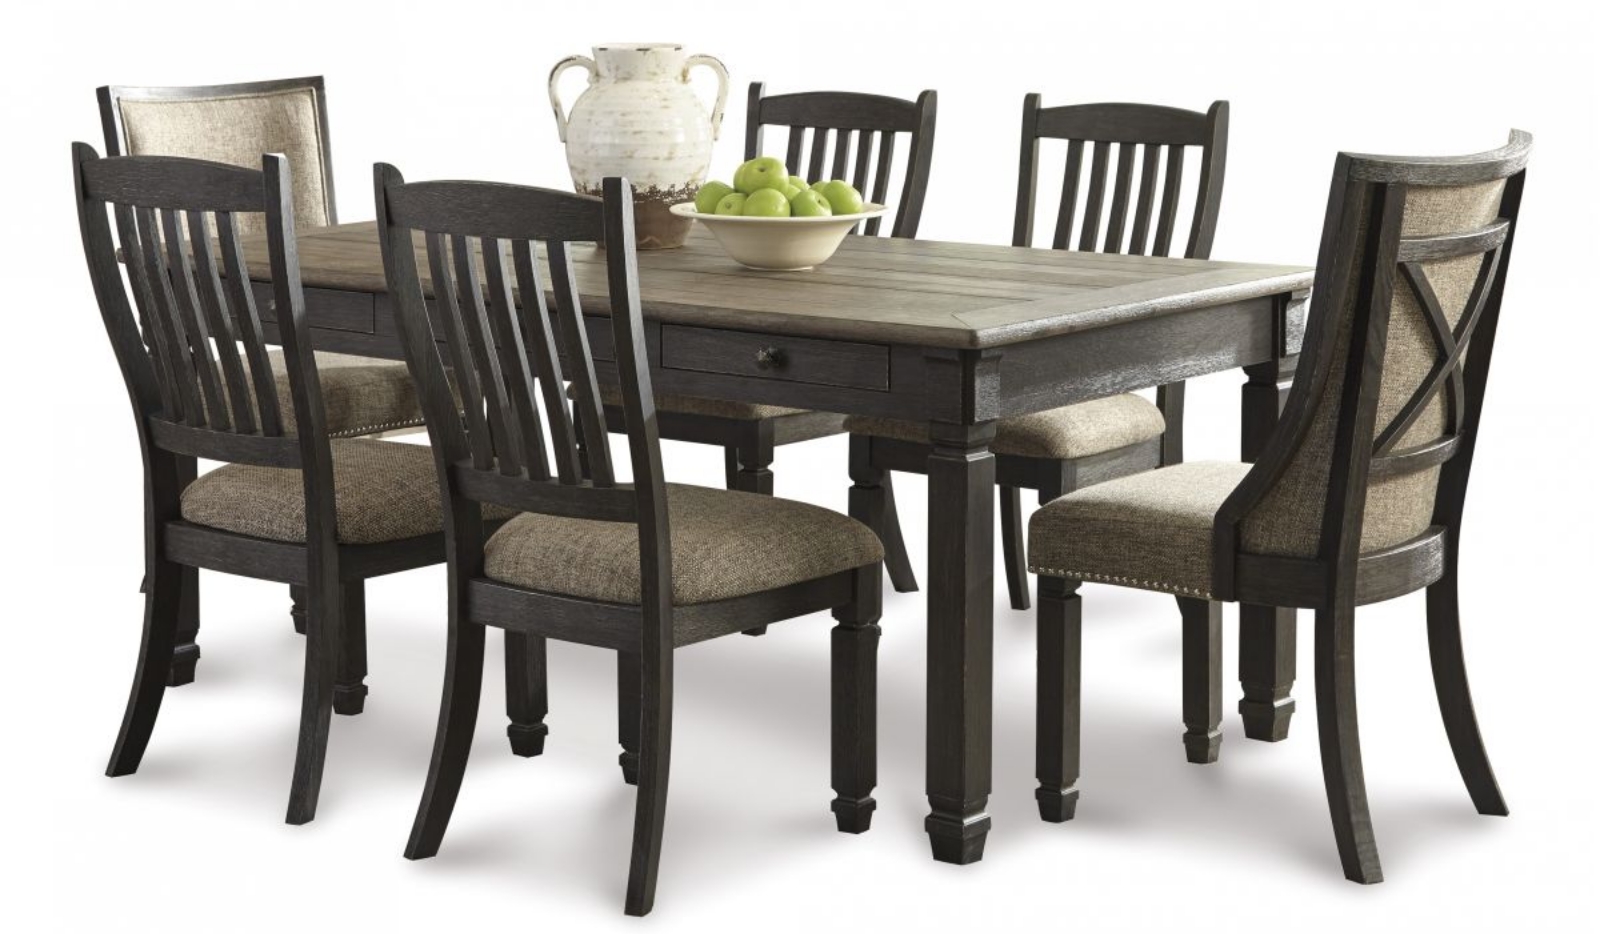 Picture of Tyler Creek Table & 6 Chairs